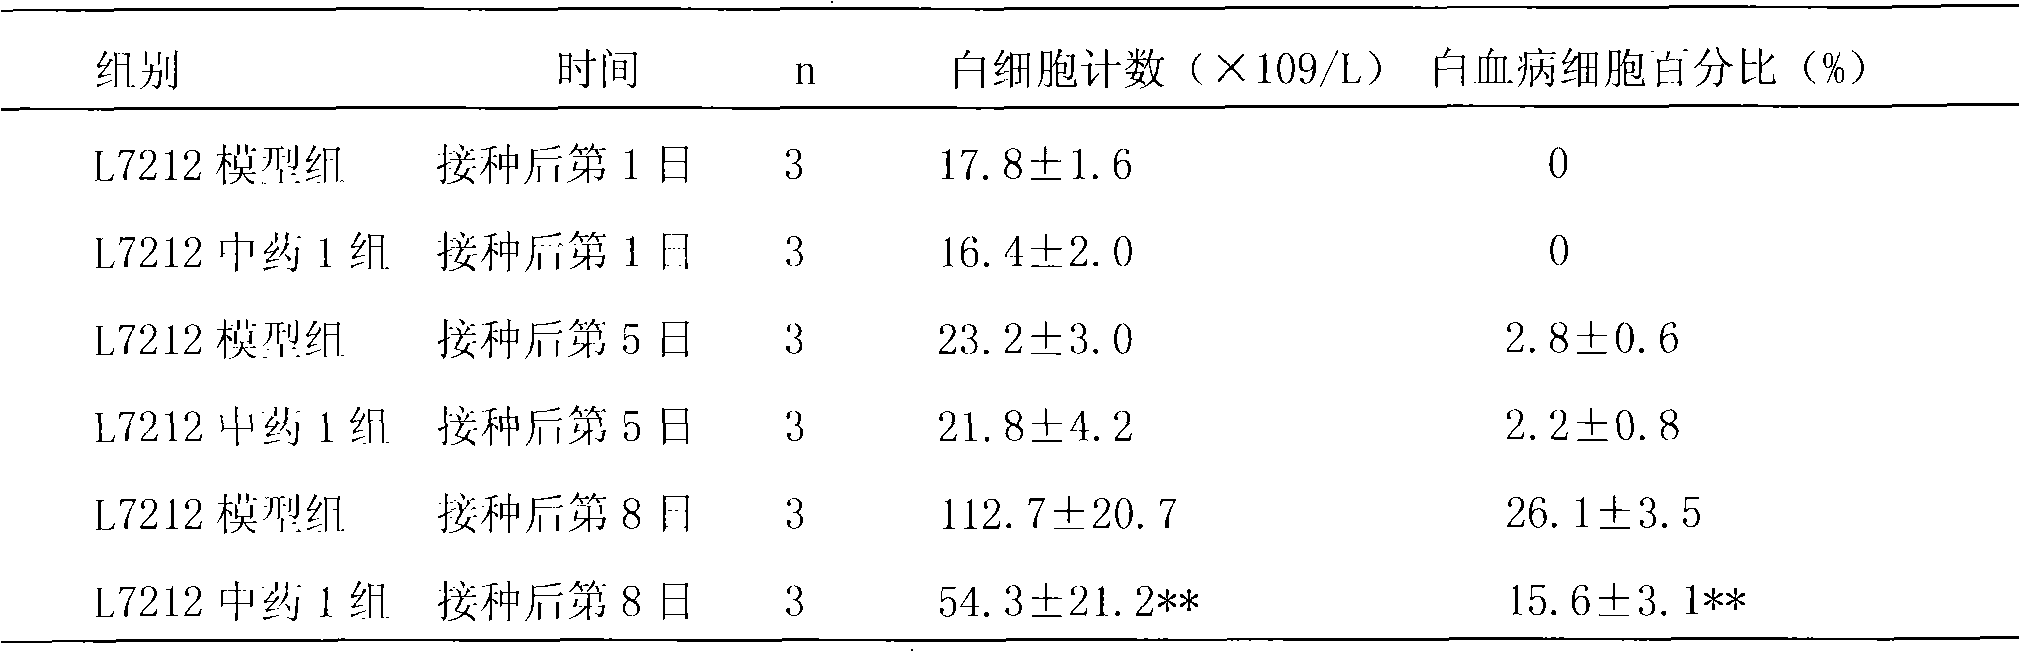 Traditional Chinese medicine combination for treating leukemia and preparation method thereof